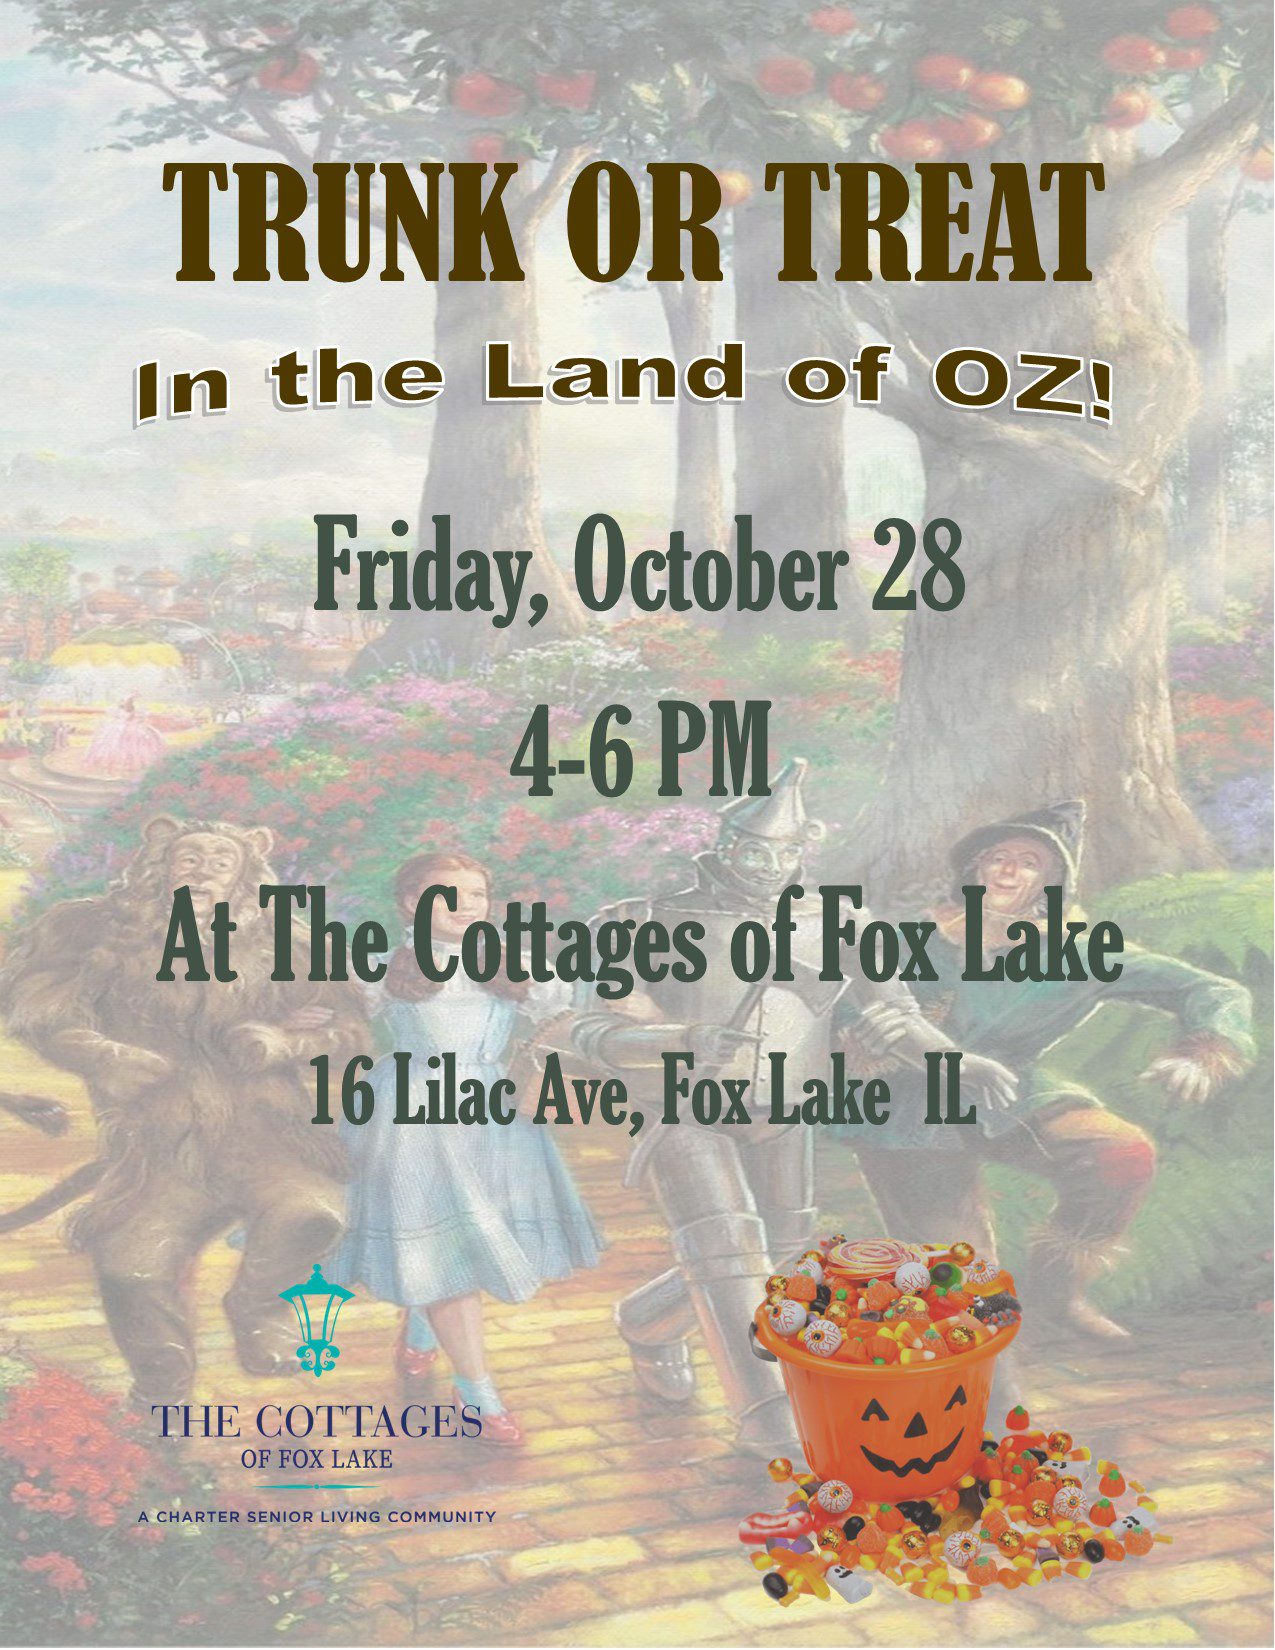 Cottages of Fox Lake - Assisted Living and Memory Care - Trunk or Treat